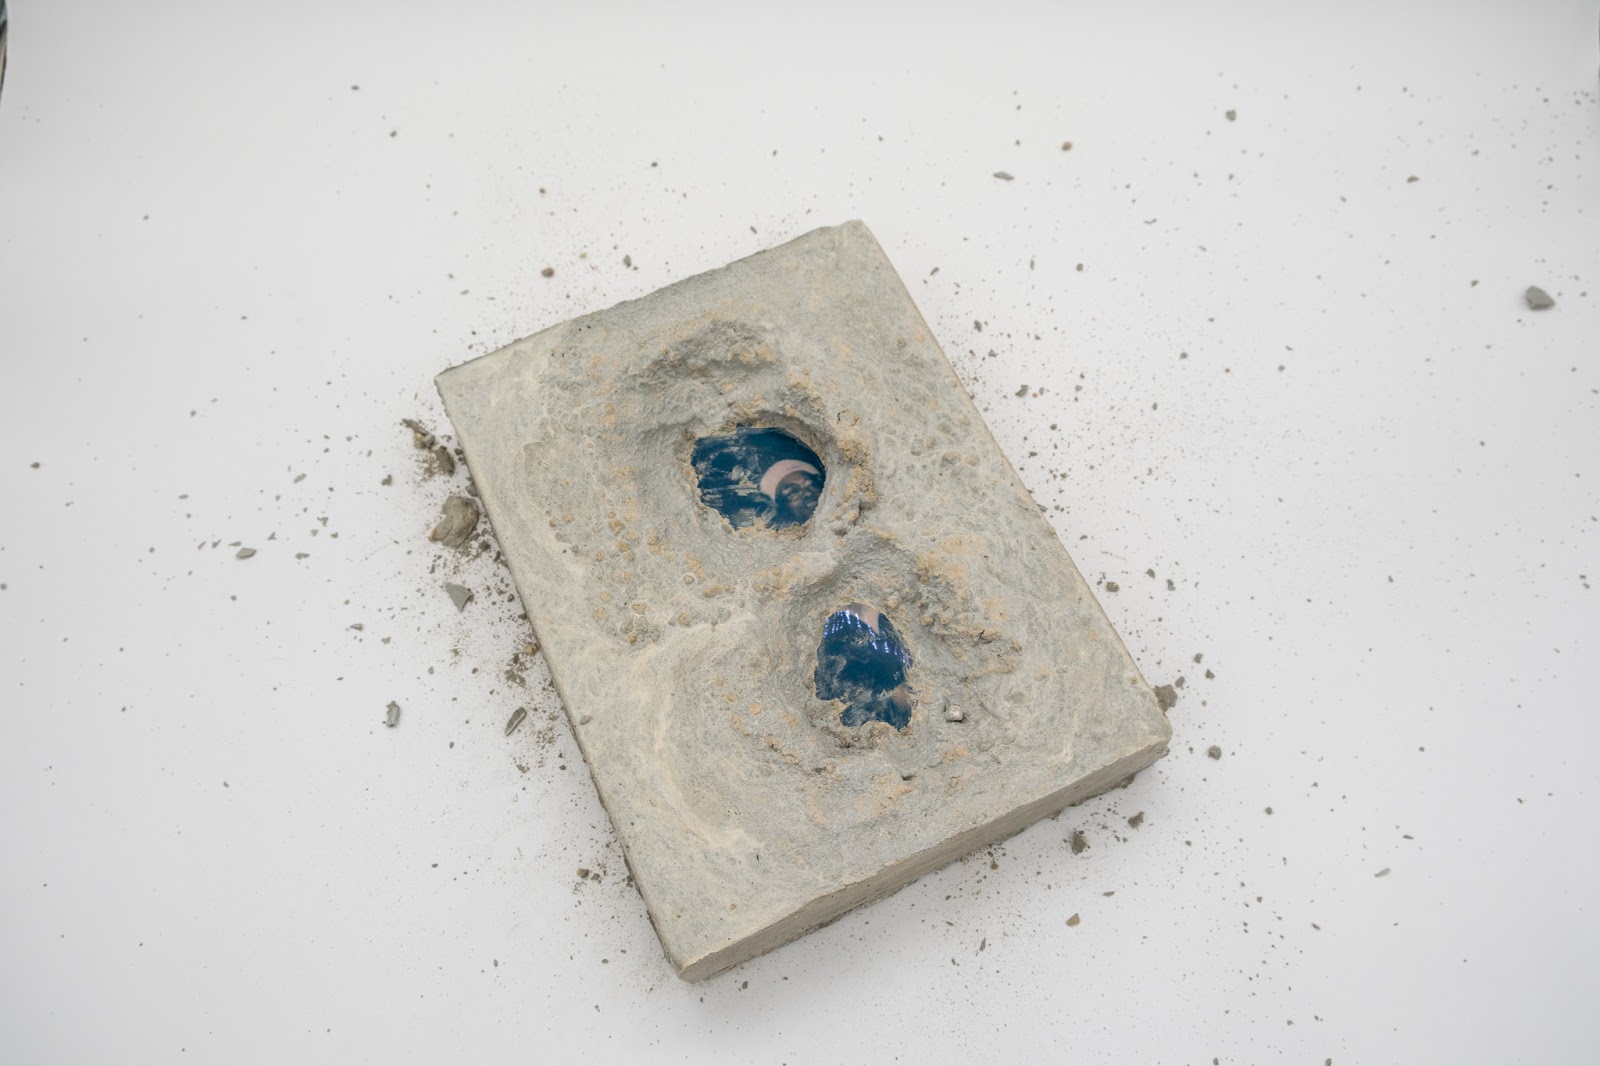 Image: A view of the 2002 work, Untitled no. 11. The work is a rectangle of concrete with small fragments and residue crumbling from it. A blue-hued photo of a person is encased by the concrete but there are two holes dug into the concrete, revealing details of the photograph. Photo courtesy of Sibyl Gallery.